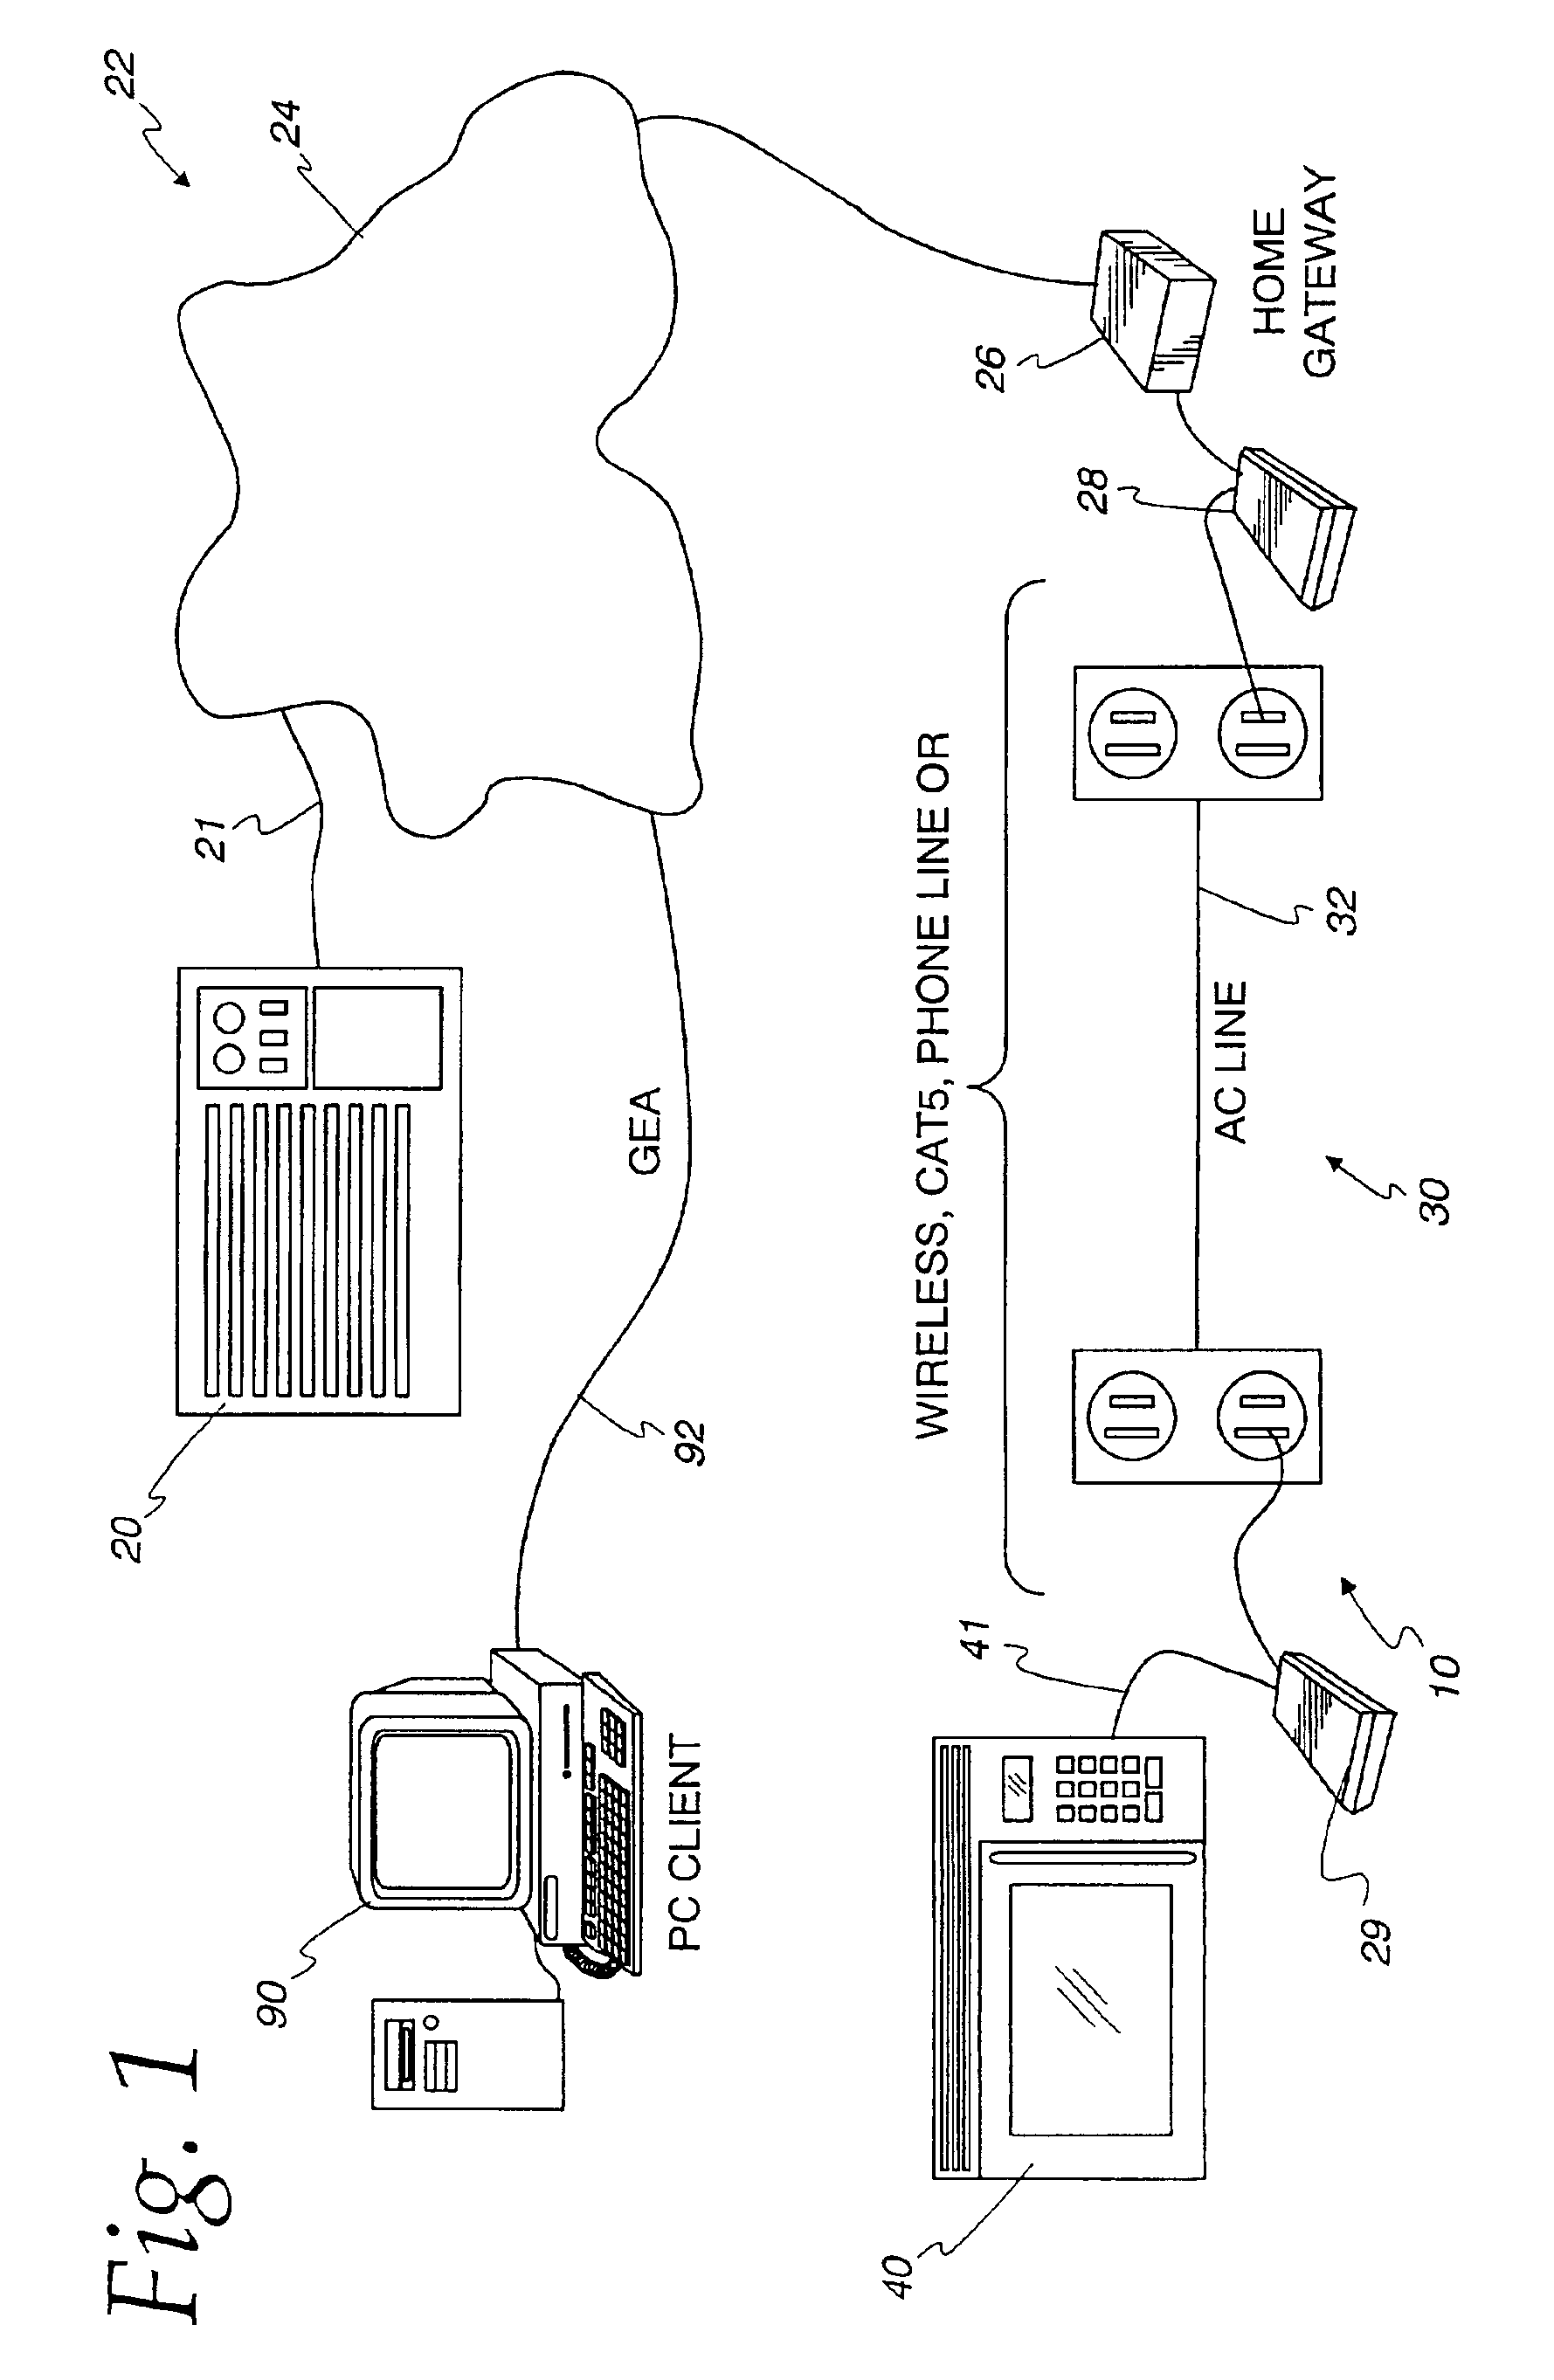 Automated cooking system for food accompanied by machine readable indicia